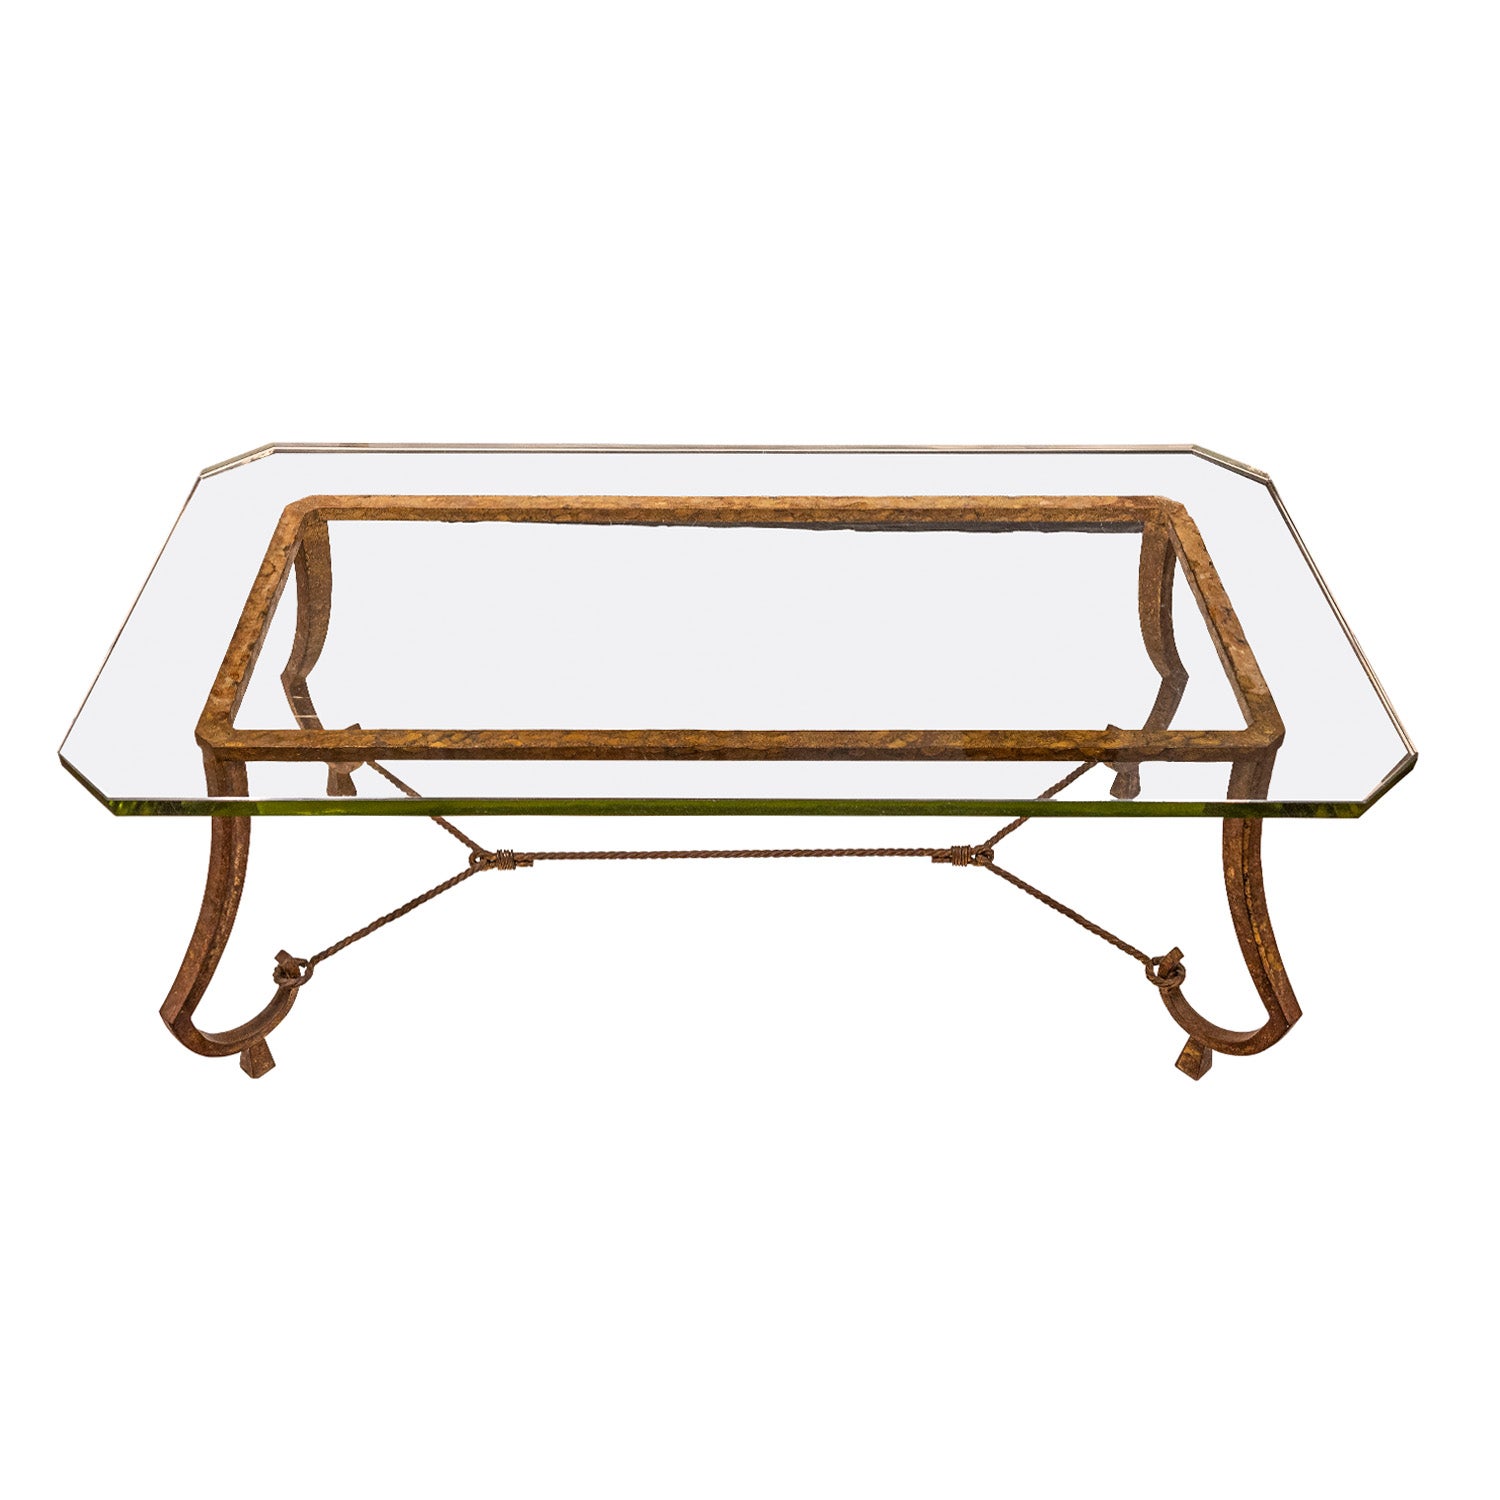 Maison Ramsay Artisan Coffee Table in Gilt Wrought Iron 1940s